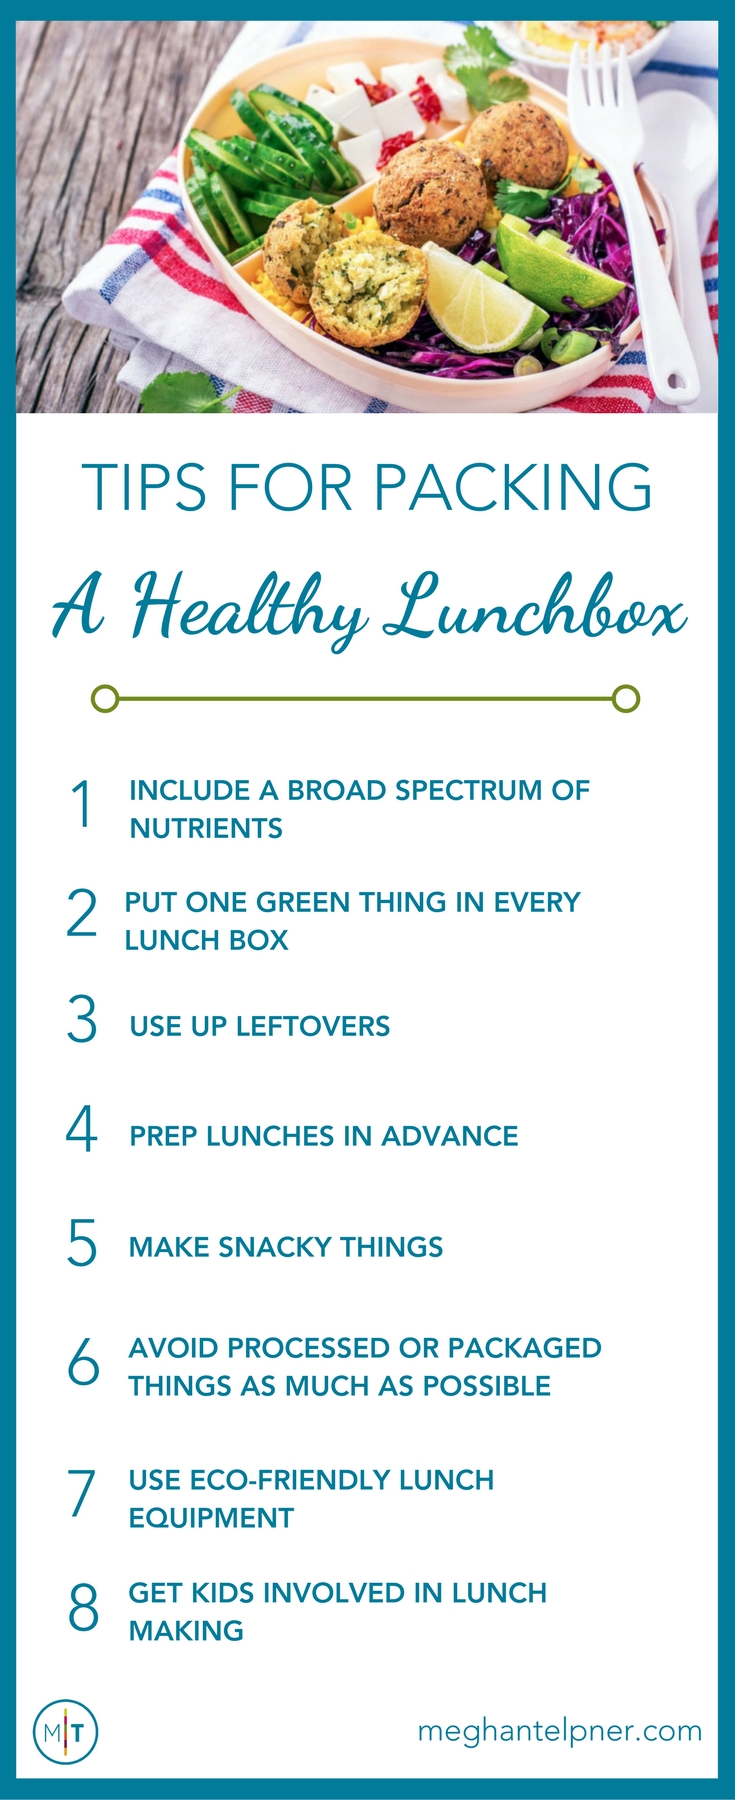 Tips for packing a healthy lunchbox 